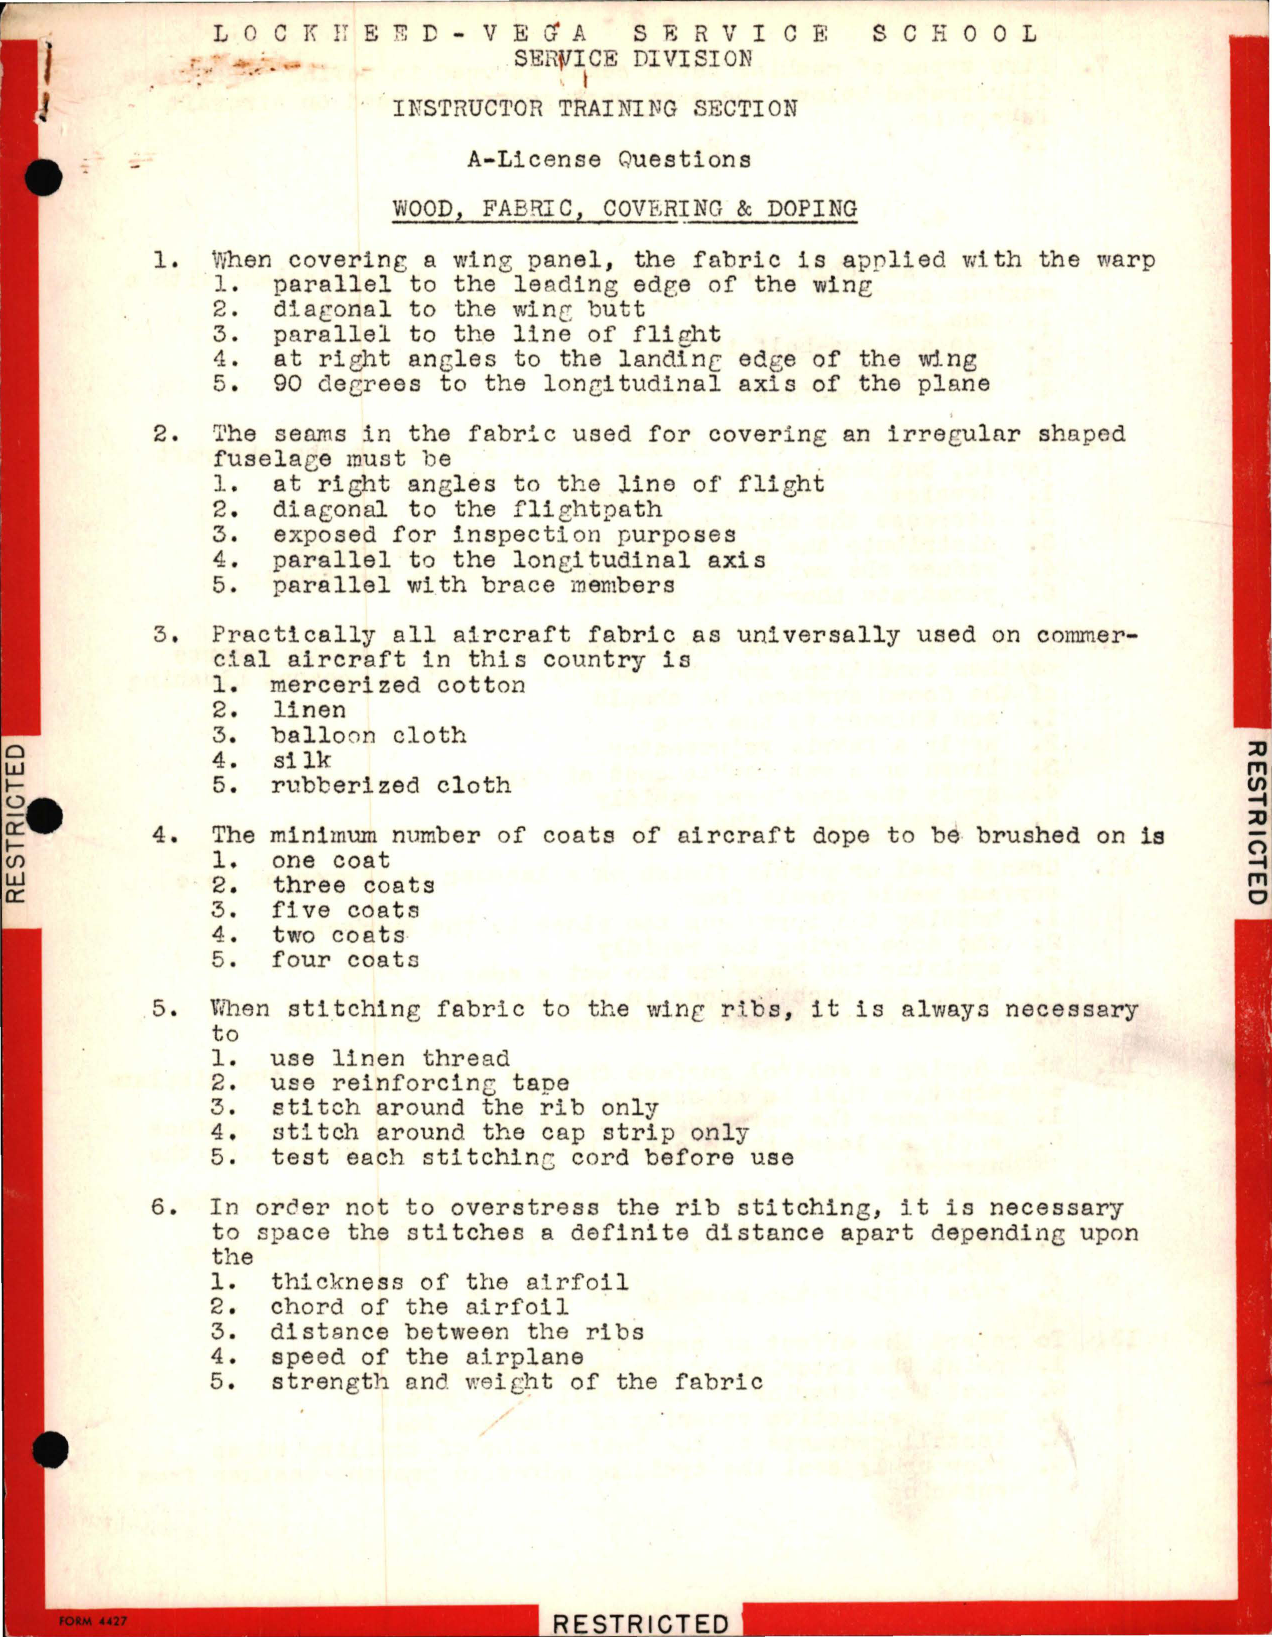 Sample page 1 from AirCorps Library document: Instructor Training Questions for Wood, Fabric, Covering and Doping - Lockheed-Vega Service School